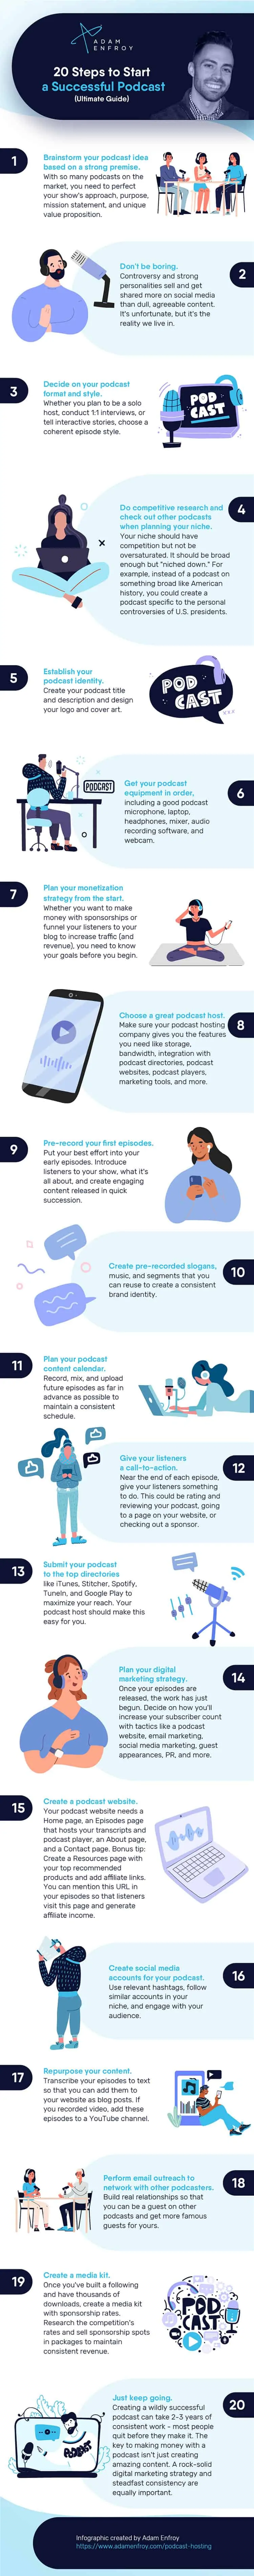 How to Start a Podcast Infographic